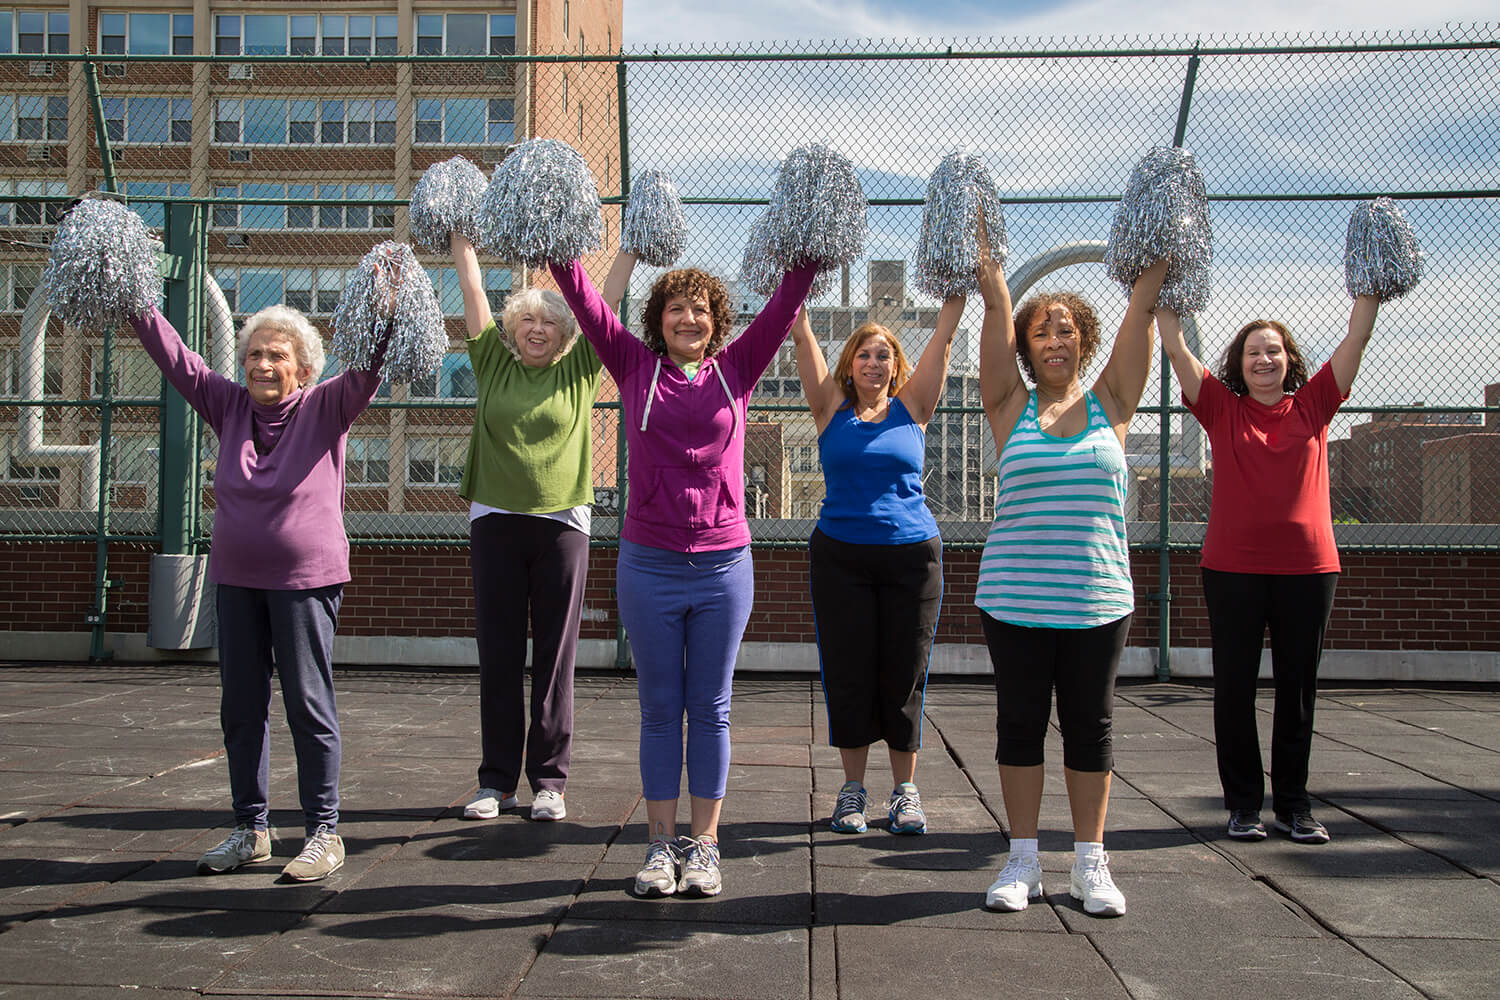 A photograph, exterior on a sunny day - 6 smiling elder women in workout clothes stand in formation on the rooft of a building in a big city, holding silver cheerleader pom-poms over their head, about to cheer.